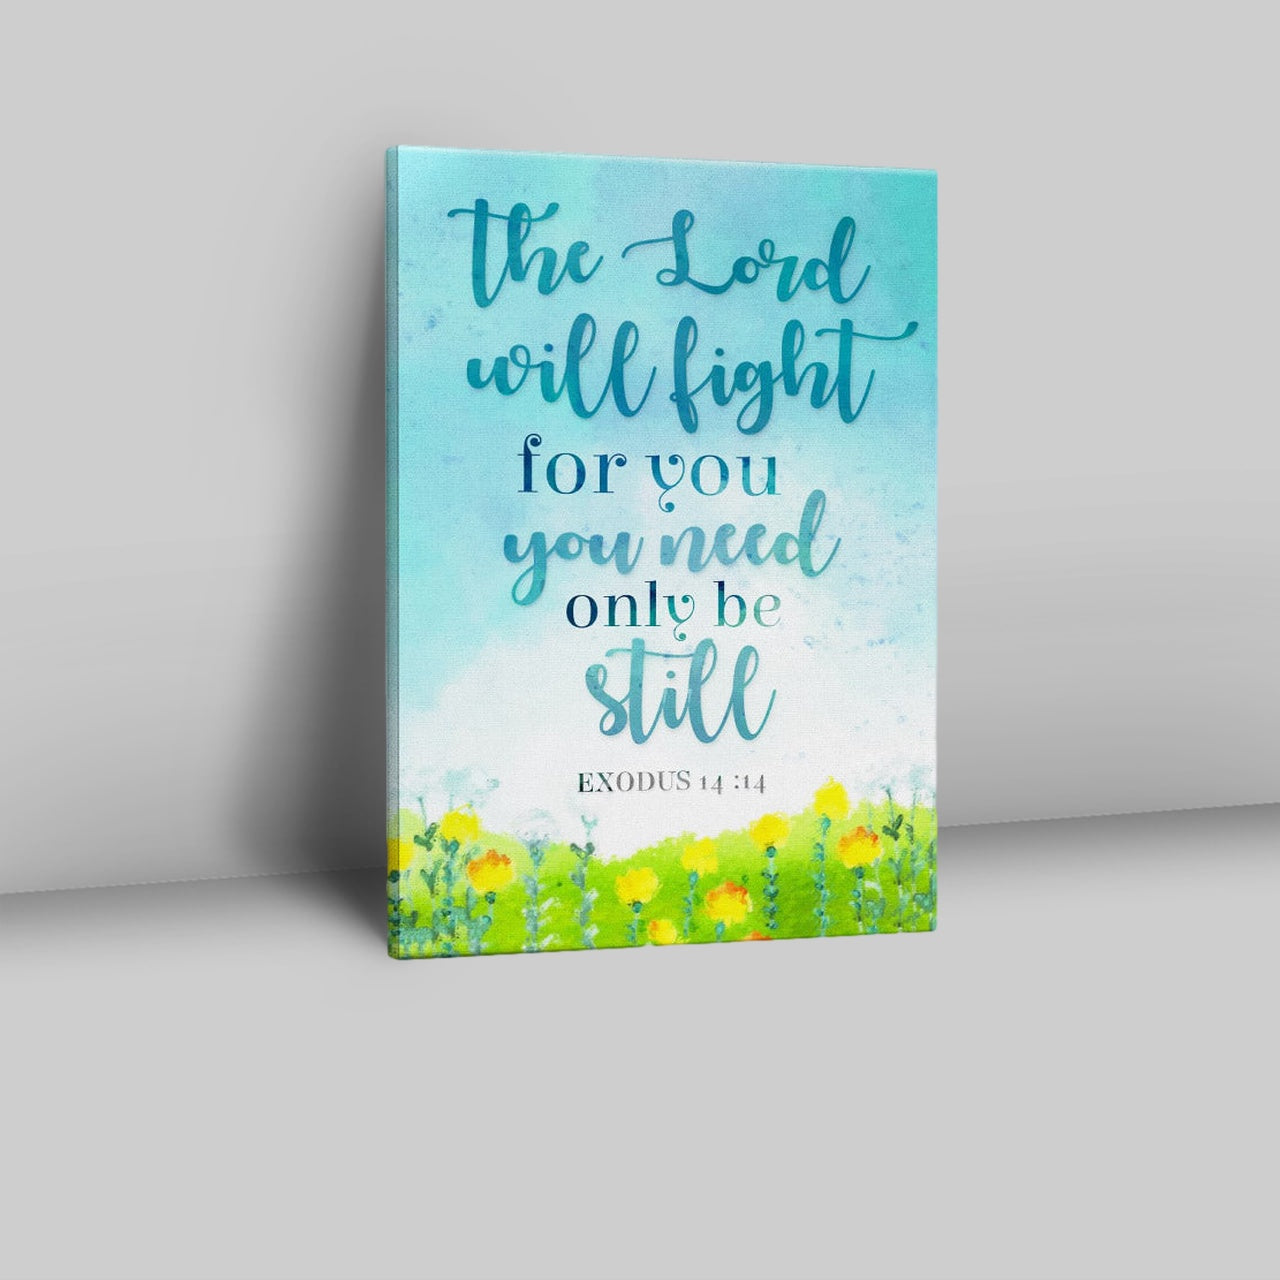 Exodus 1414 The Lord Will Fight For You Christian Canvas Prints - Bible Verse Wall Decor - Scripture Wall Art